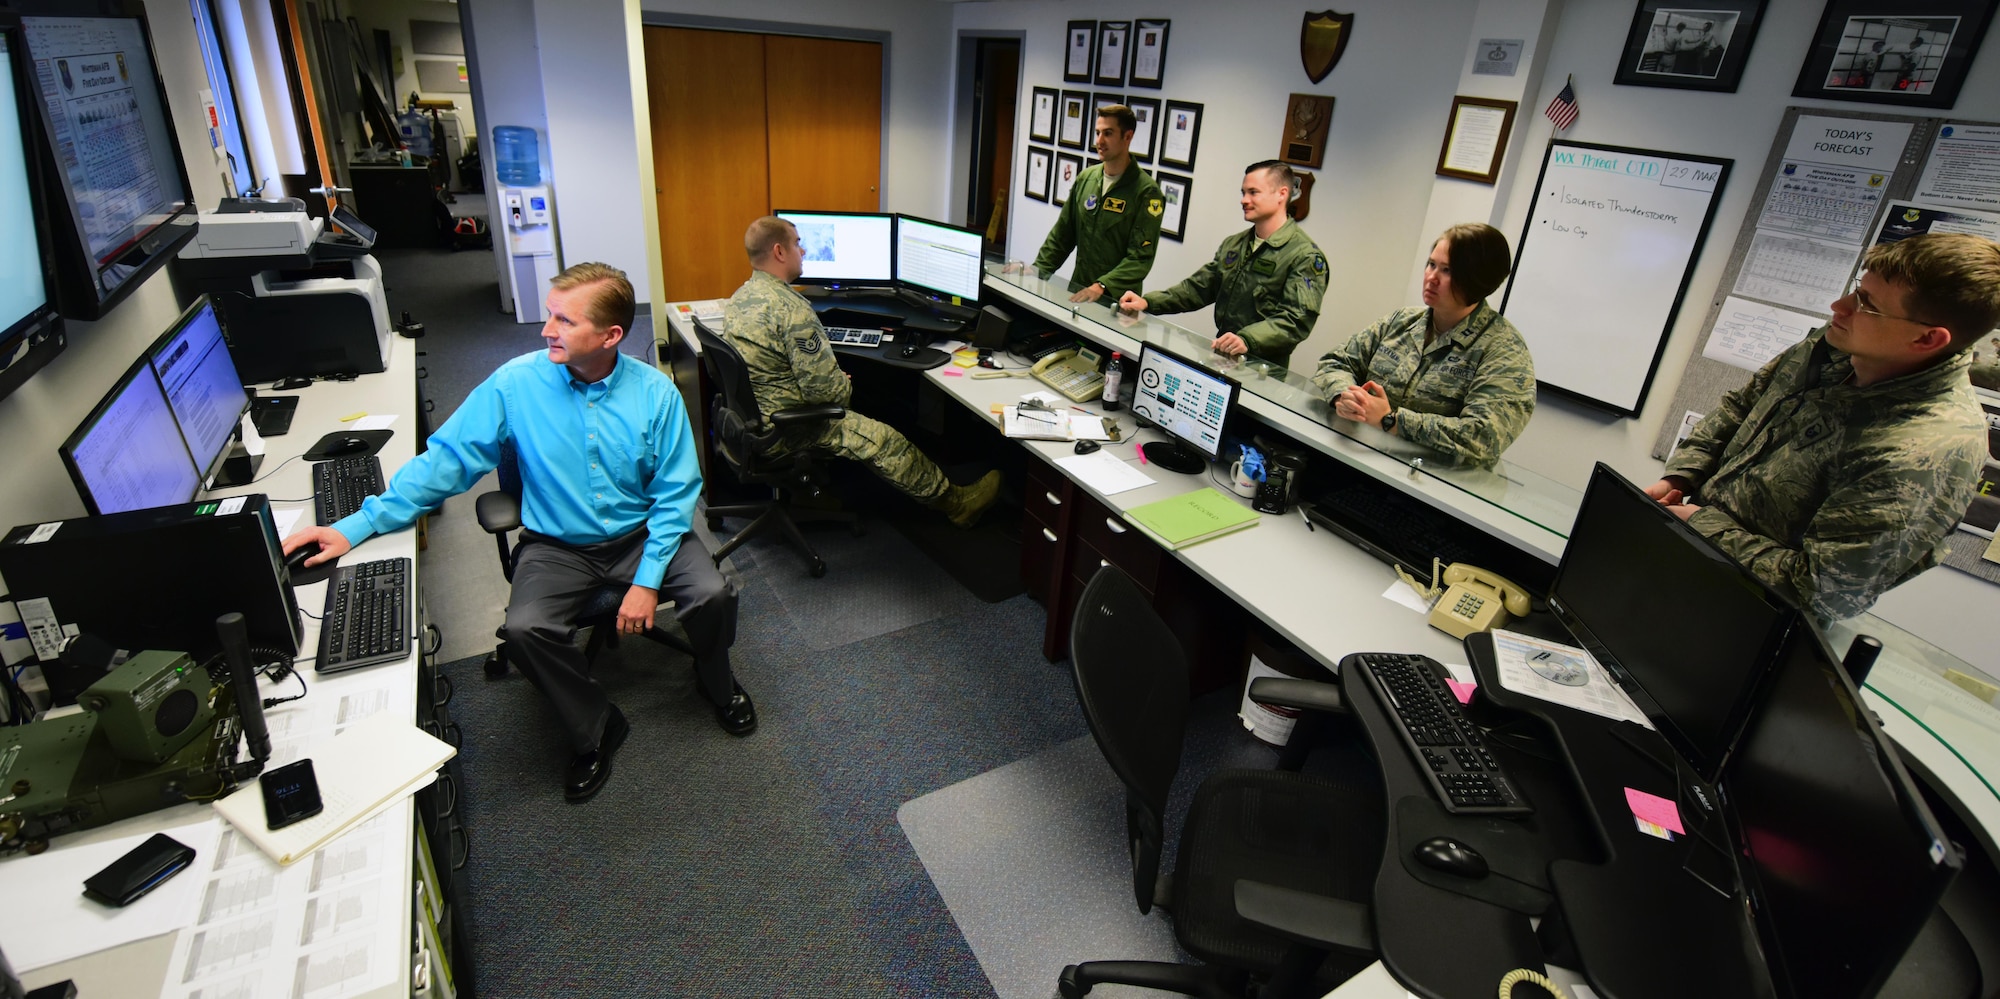 Walter Otto, a meteorological technician assigned to the 509th Operations Support Squadron, relays operational data to an aircrew while flight leadership listens in during a brief at Whiteman Air Force Base, Mo., March 29, 2017. Otto earned the title as Air Force Global Strike Command’s Weather Civilian of the Year for 2016. (U.S. Air Force photo by Airman 1st Class Jazmin Smith)